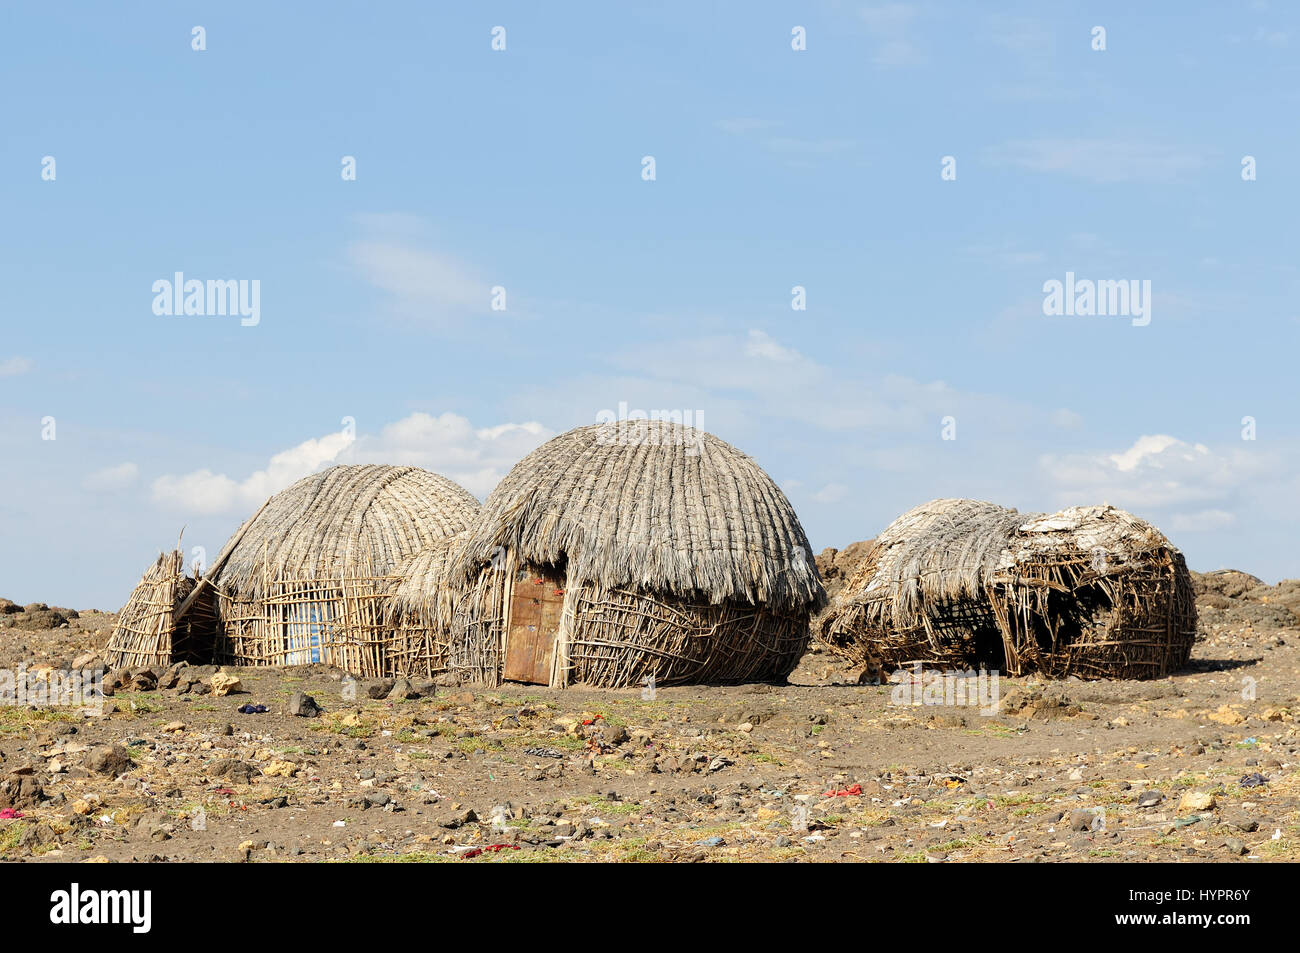 Traditional round house of people from the Turkana tribe on the shore of the lake Turkana in Kenya Stock Photo